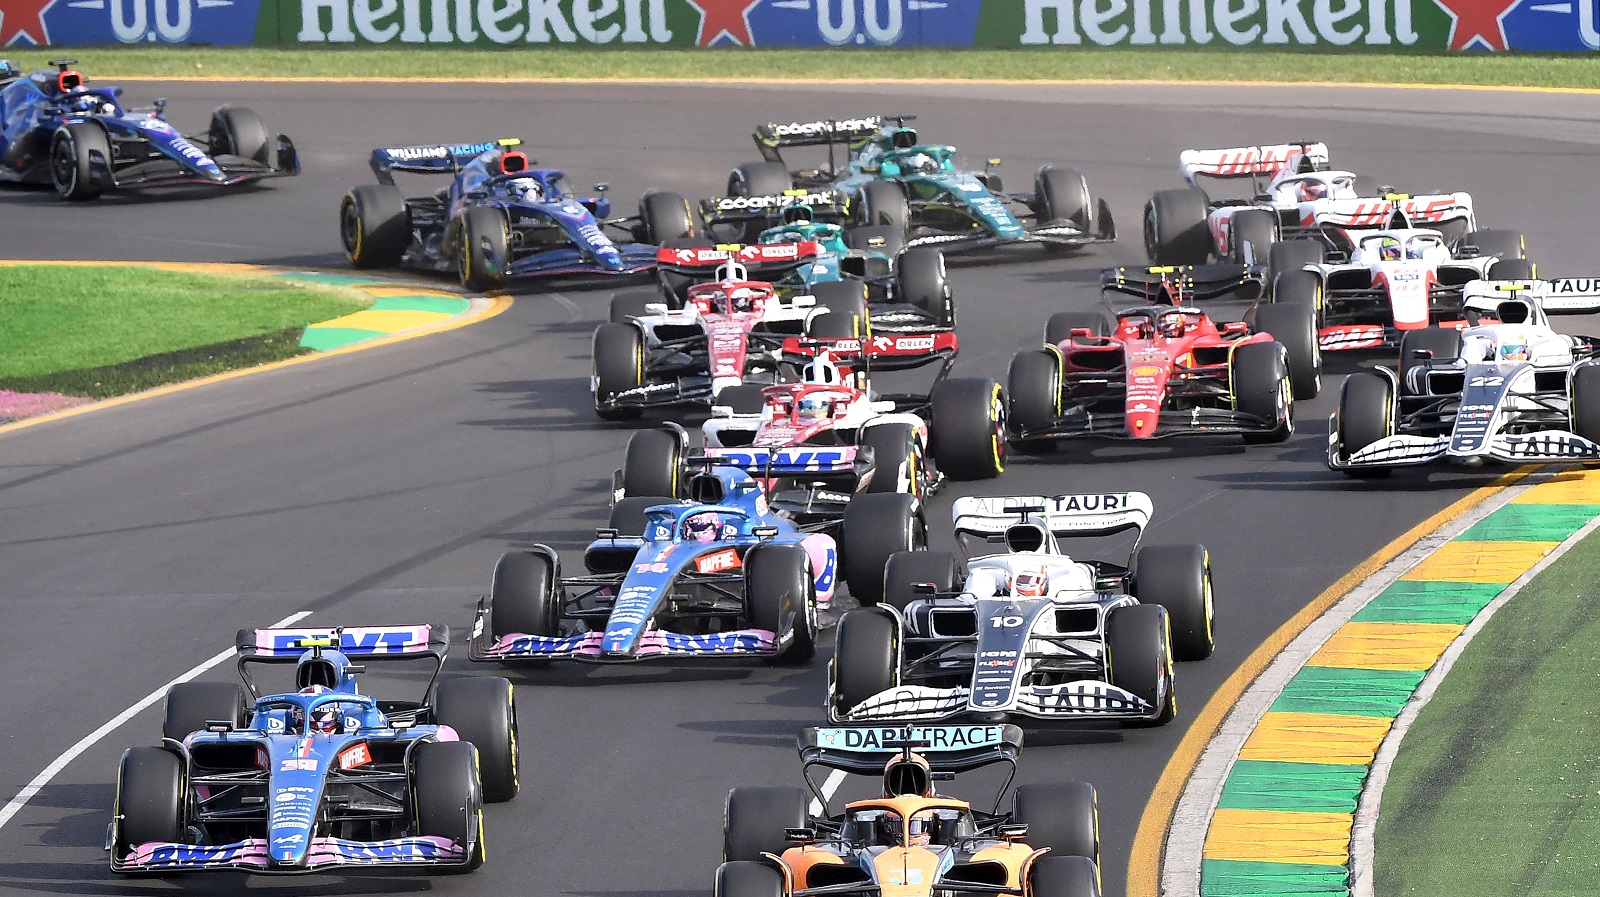 Formula 1 cars negotiate a corner at the start of the 2022 Australian Grand Prix at the Albert Park Circuit in Melbourne on April 10, 2022.  | William West/AFP via Getty Images